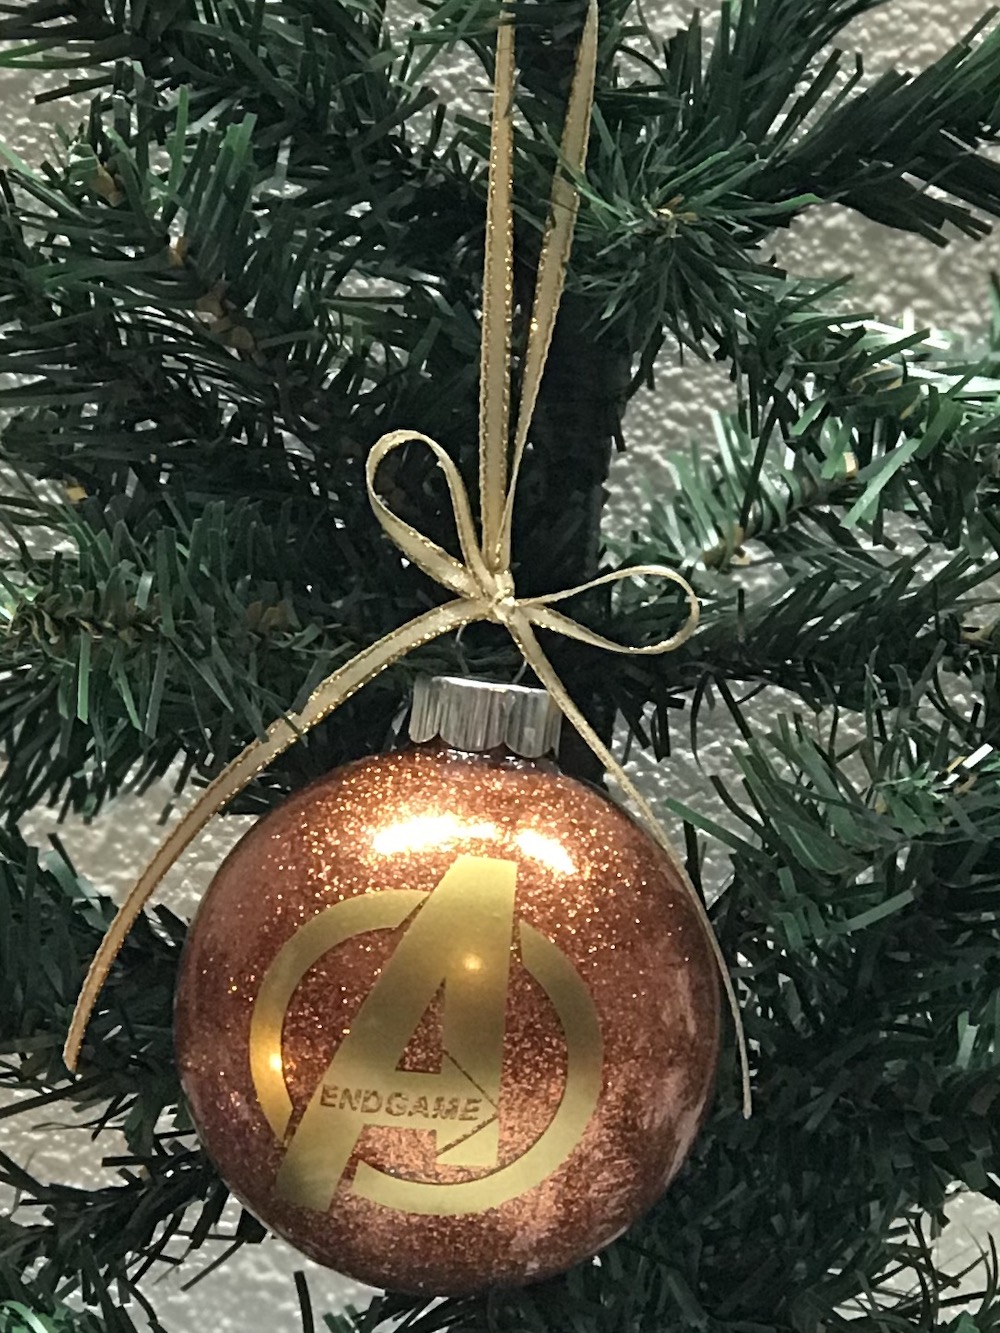 When the new Marvel Avengers Endgame trailer hit, I decided I needed to create an Avengers Endgame Ornament. Free cut file is included for you to make too!